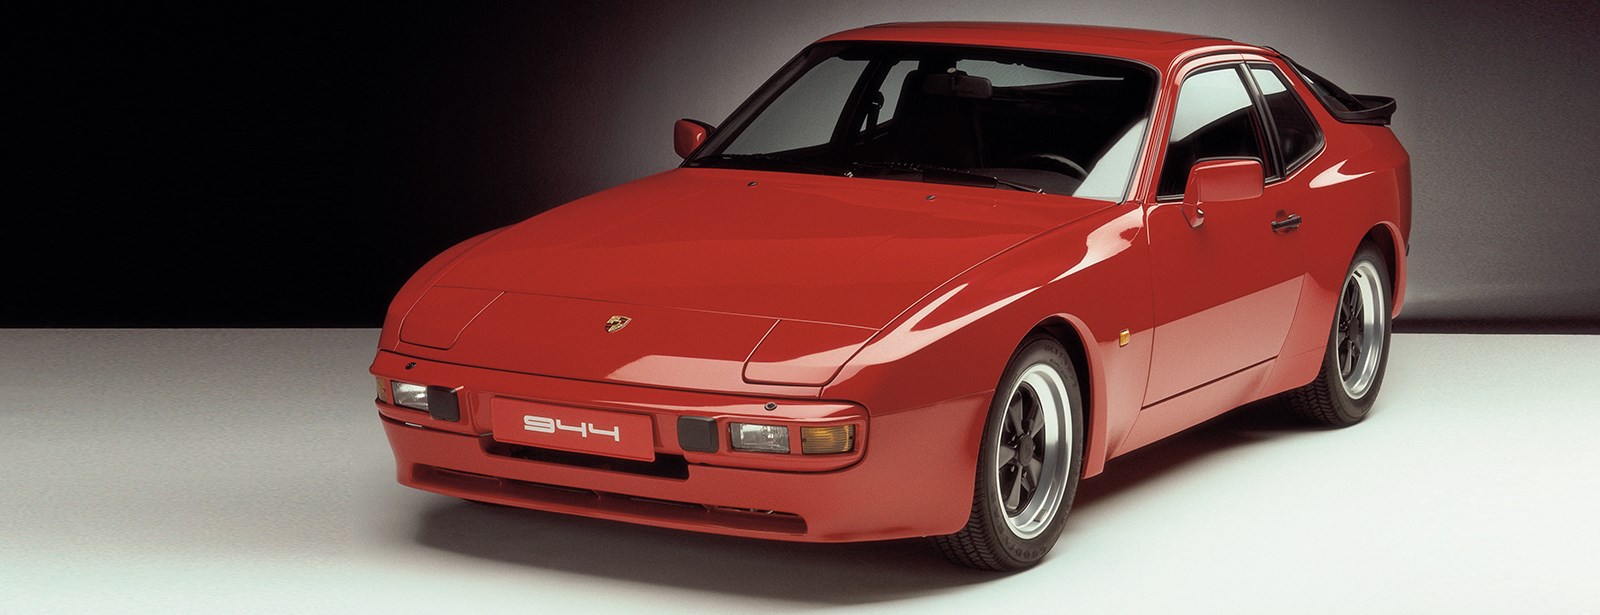 Porsche 944 Buying Guide: The affordable 911 alternative